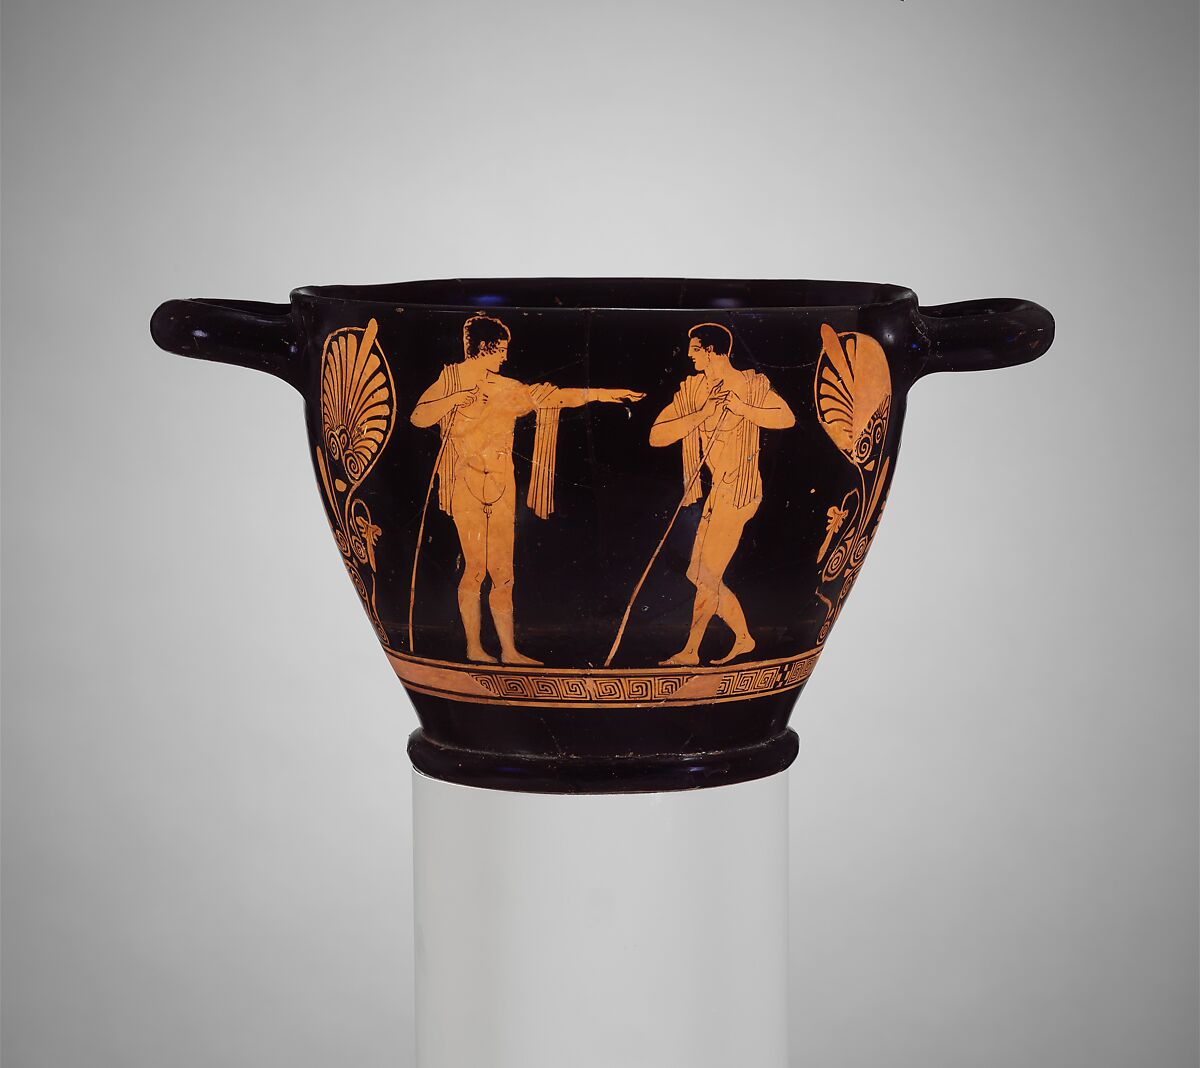 Terracotta skyphos (deep drinking cup), Attributed to the Painter of London E 777, Terracotta, Greek, Attic 